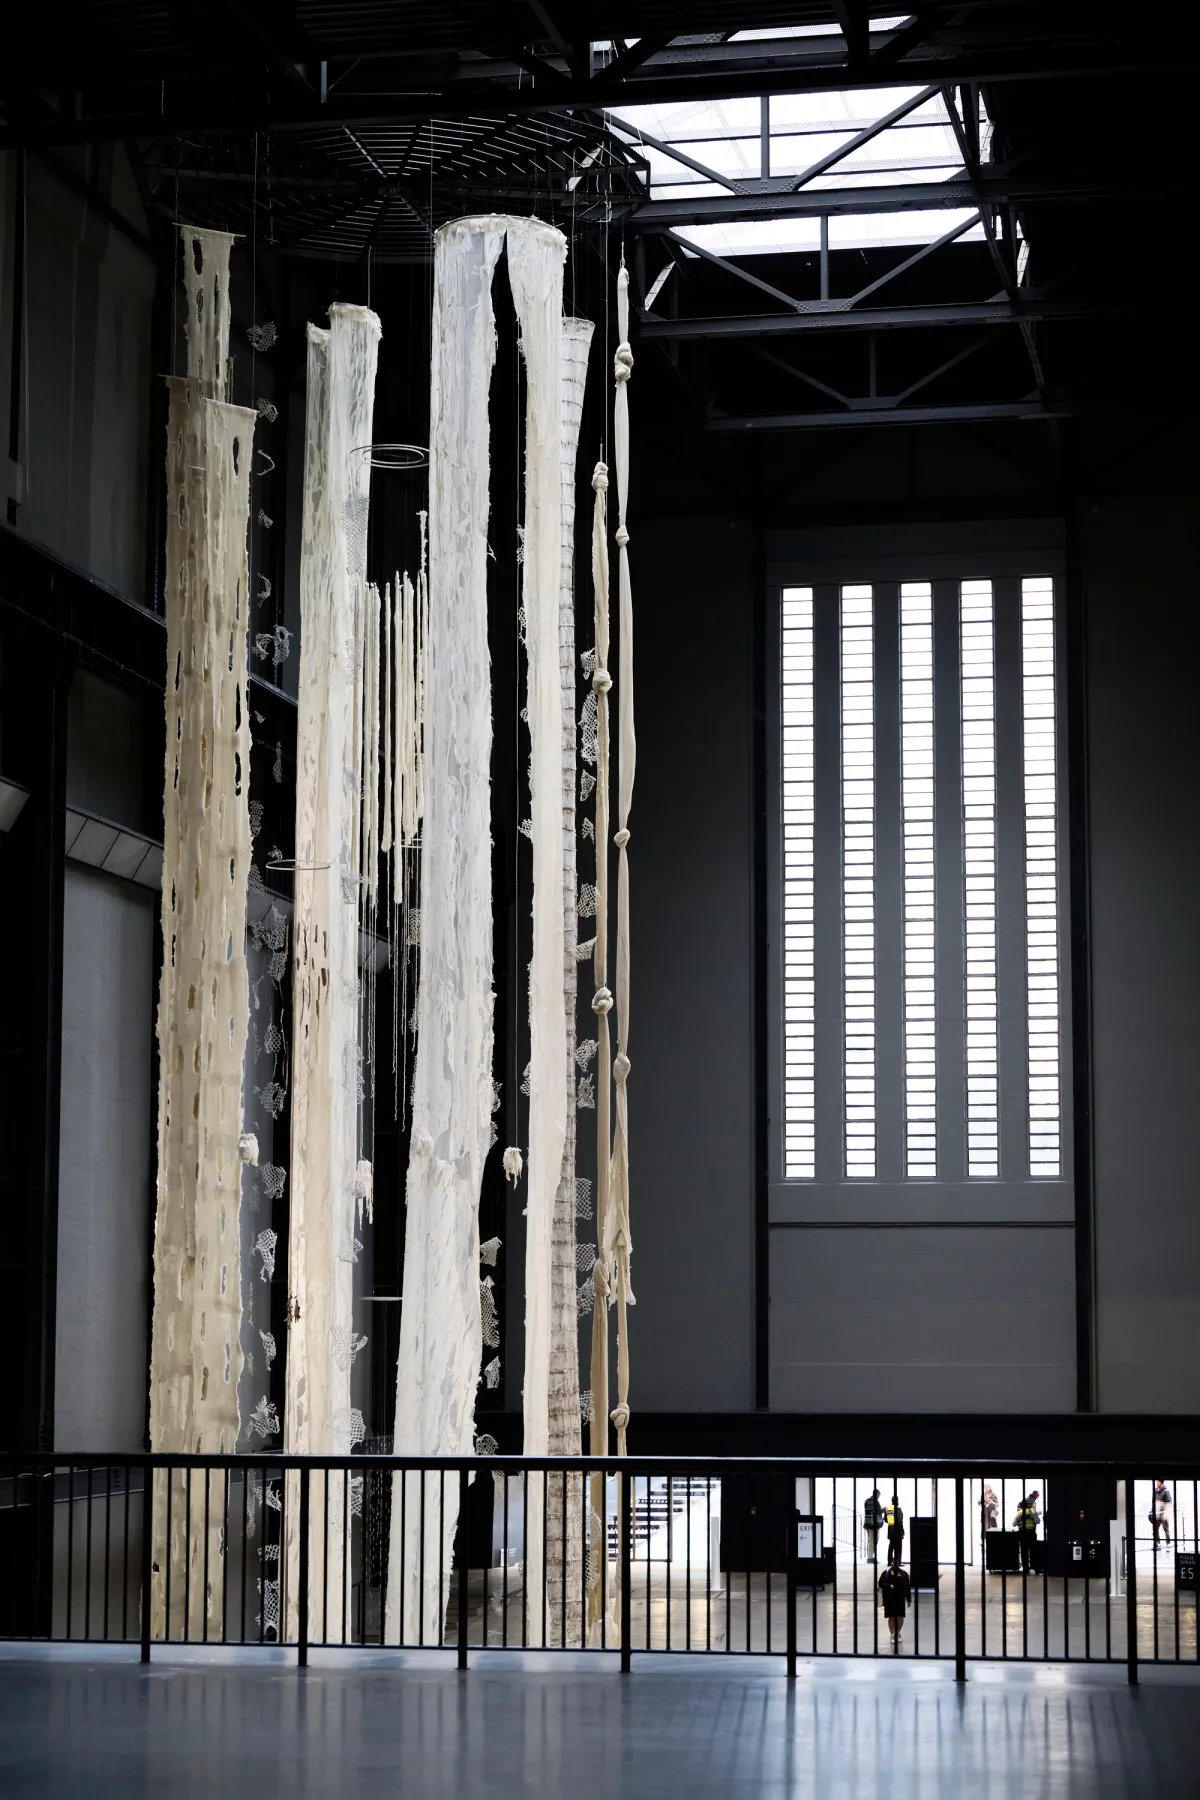 An art installation featuring white torn curtains, fishnets, and rugs suspended from the high ceiling of a gallery hall, viewed from an indoor balcony.